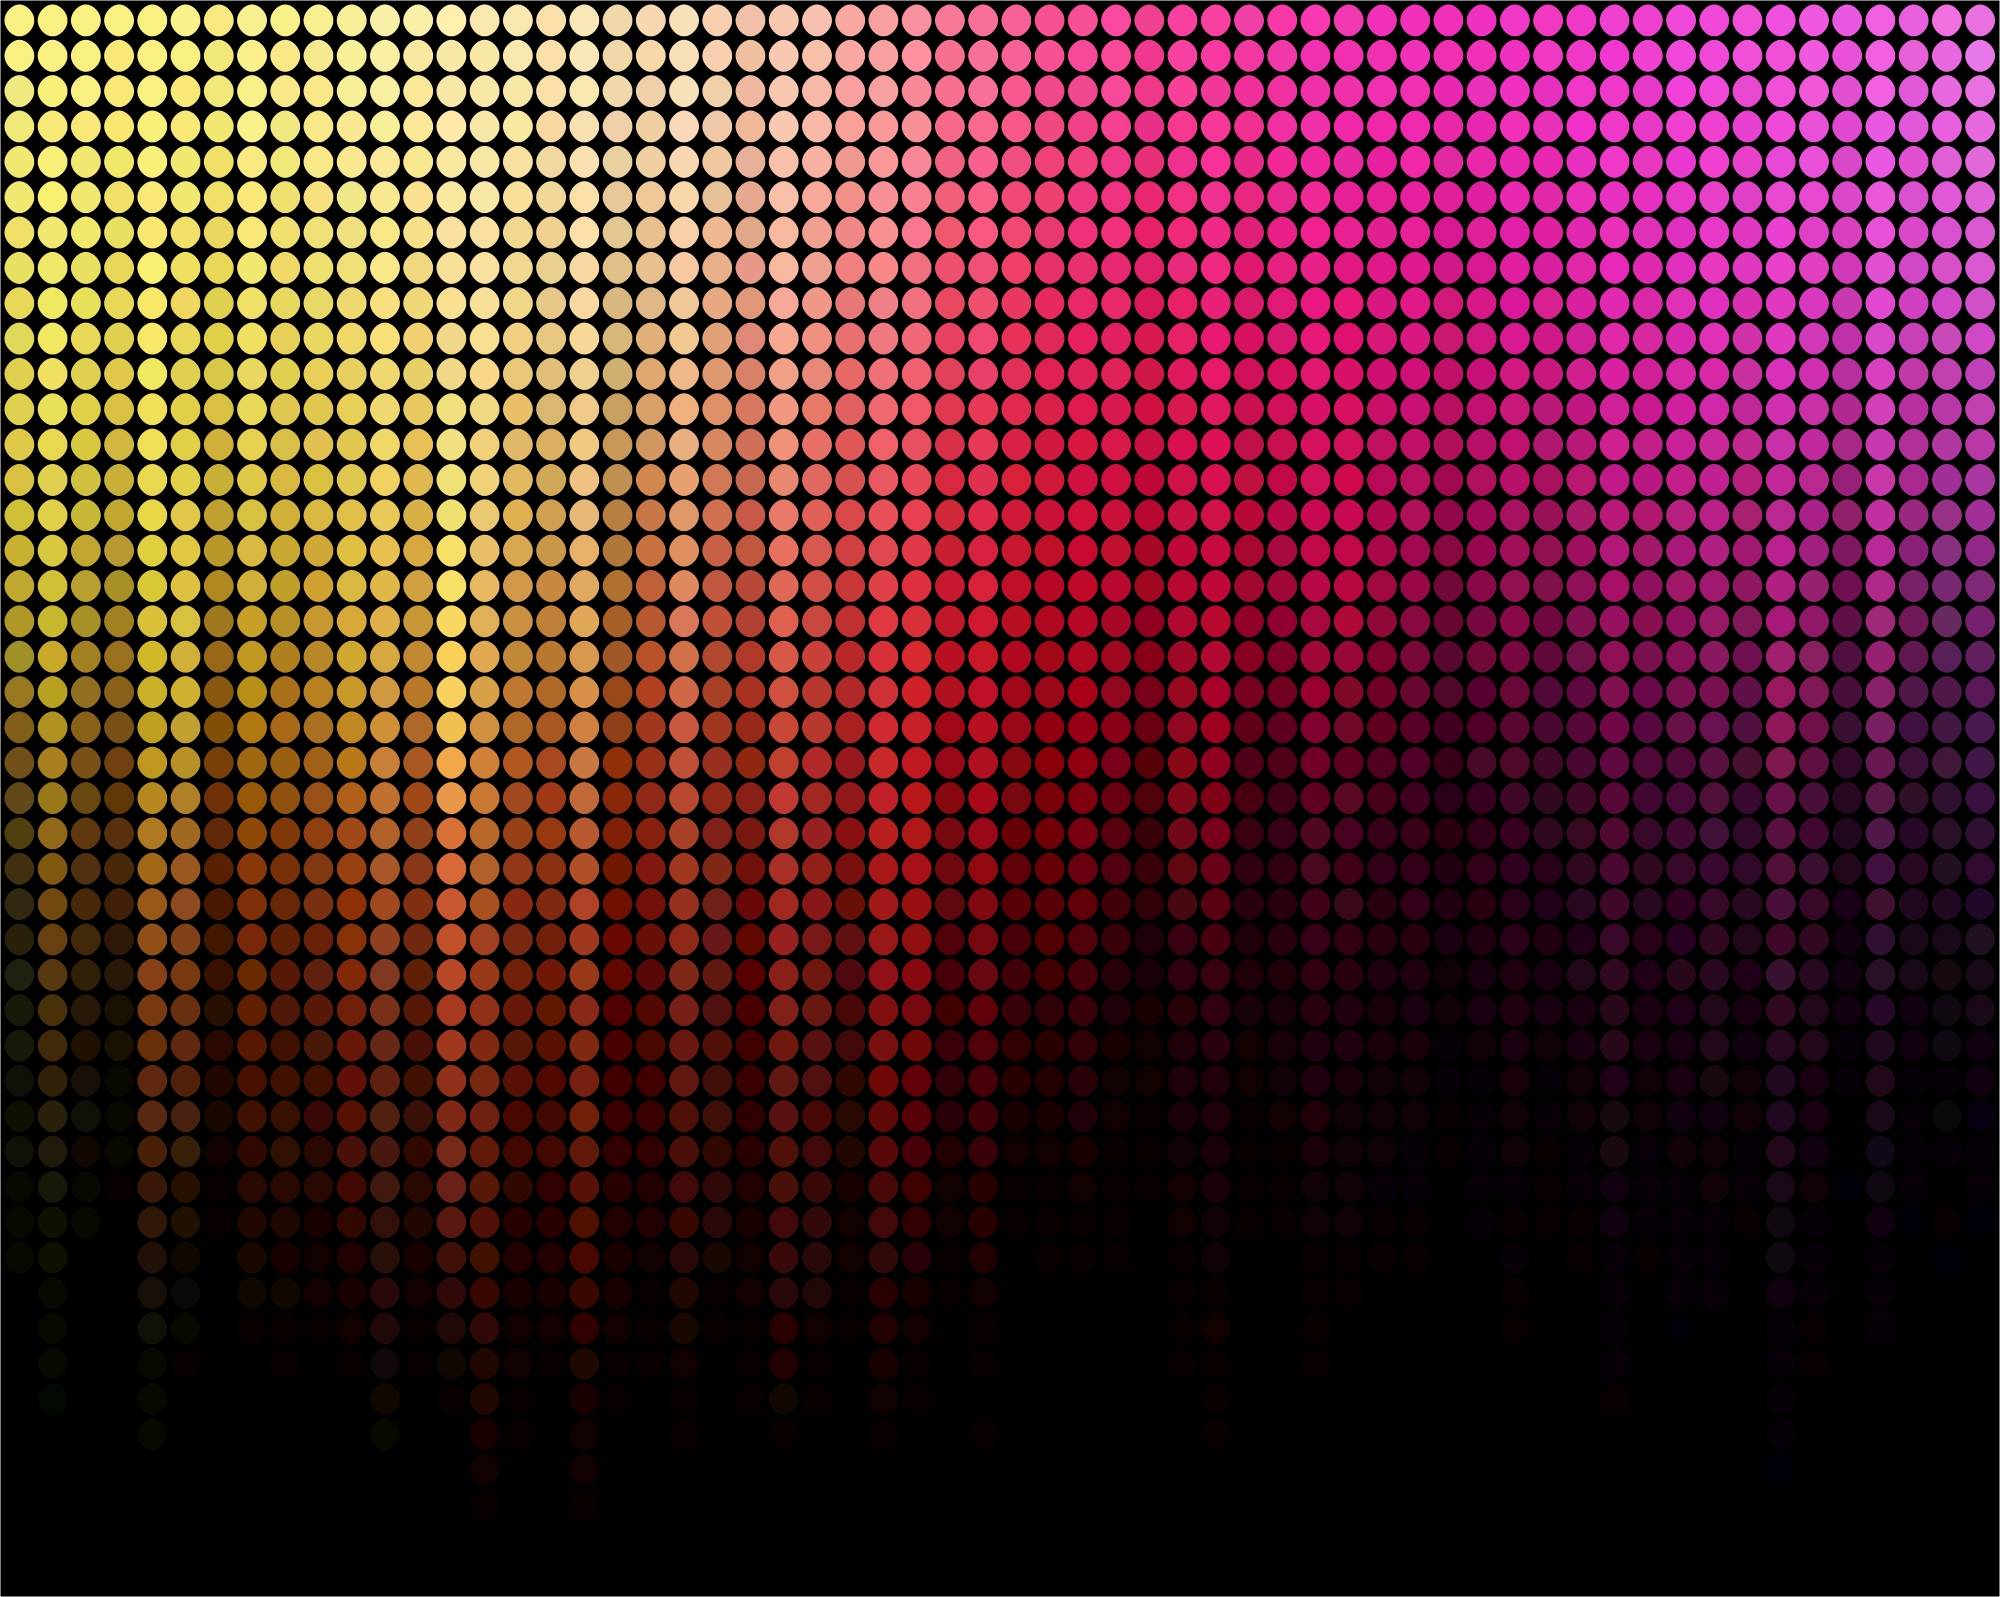 Neon Colorful Backgrounds for Free Download 46 Neon